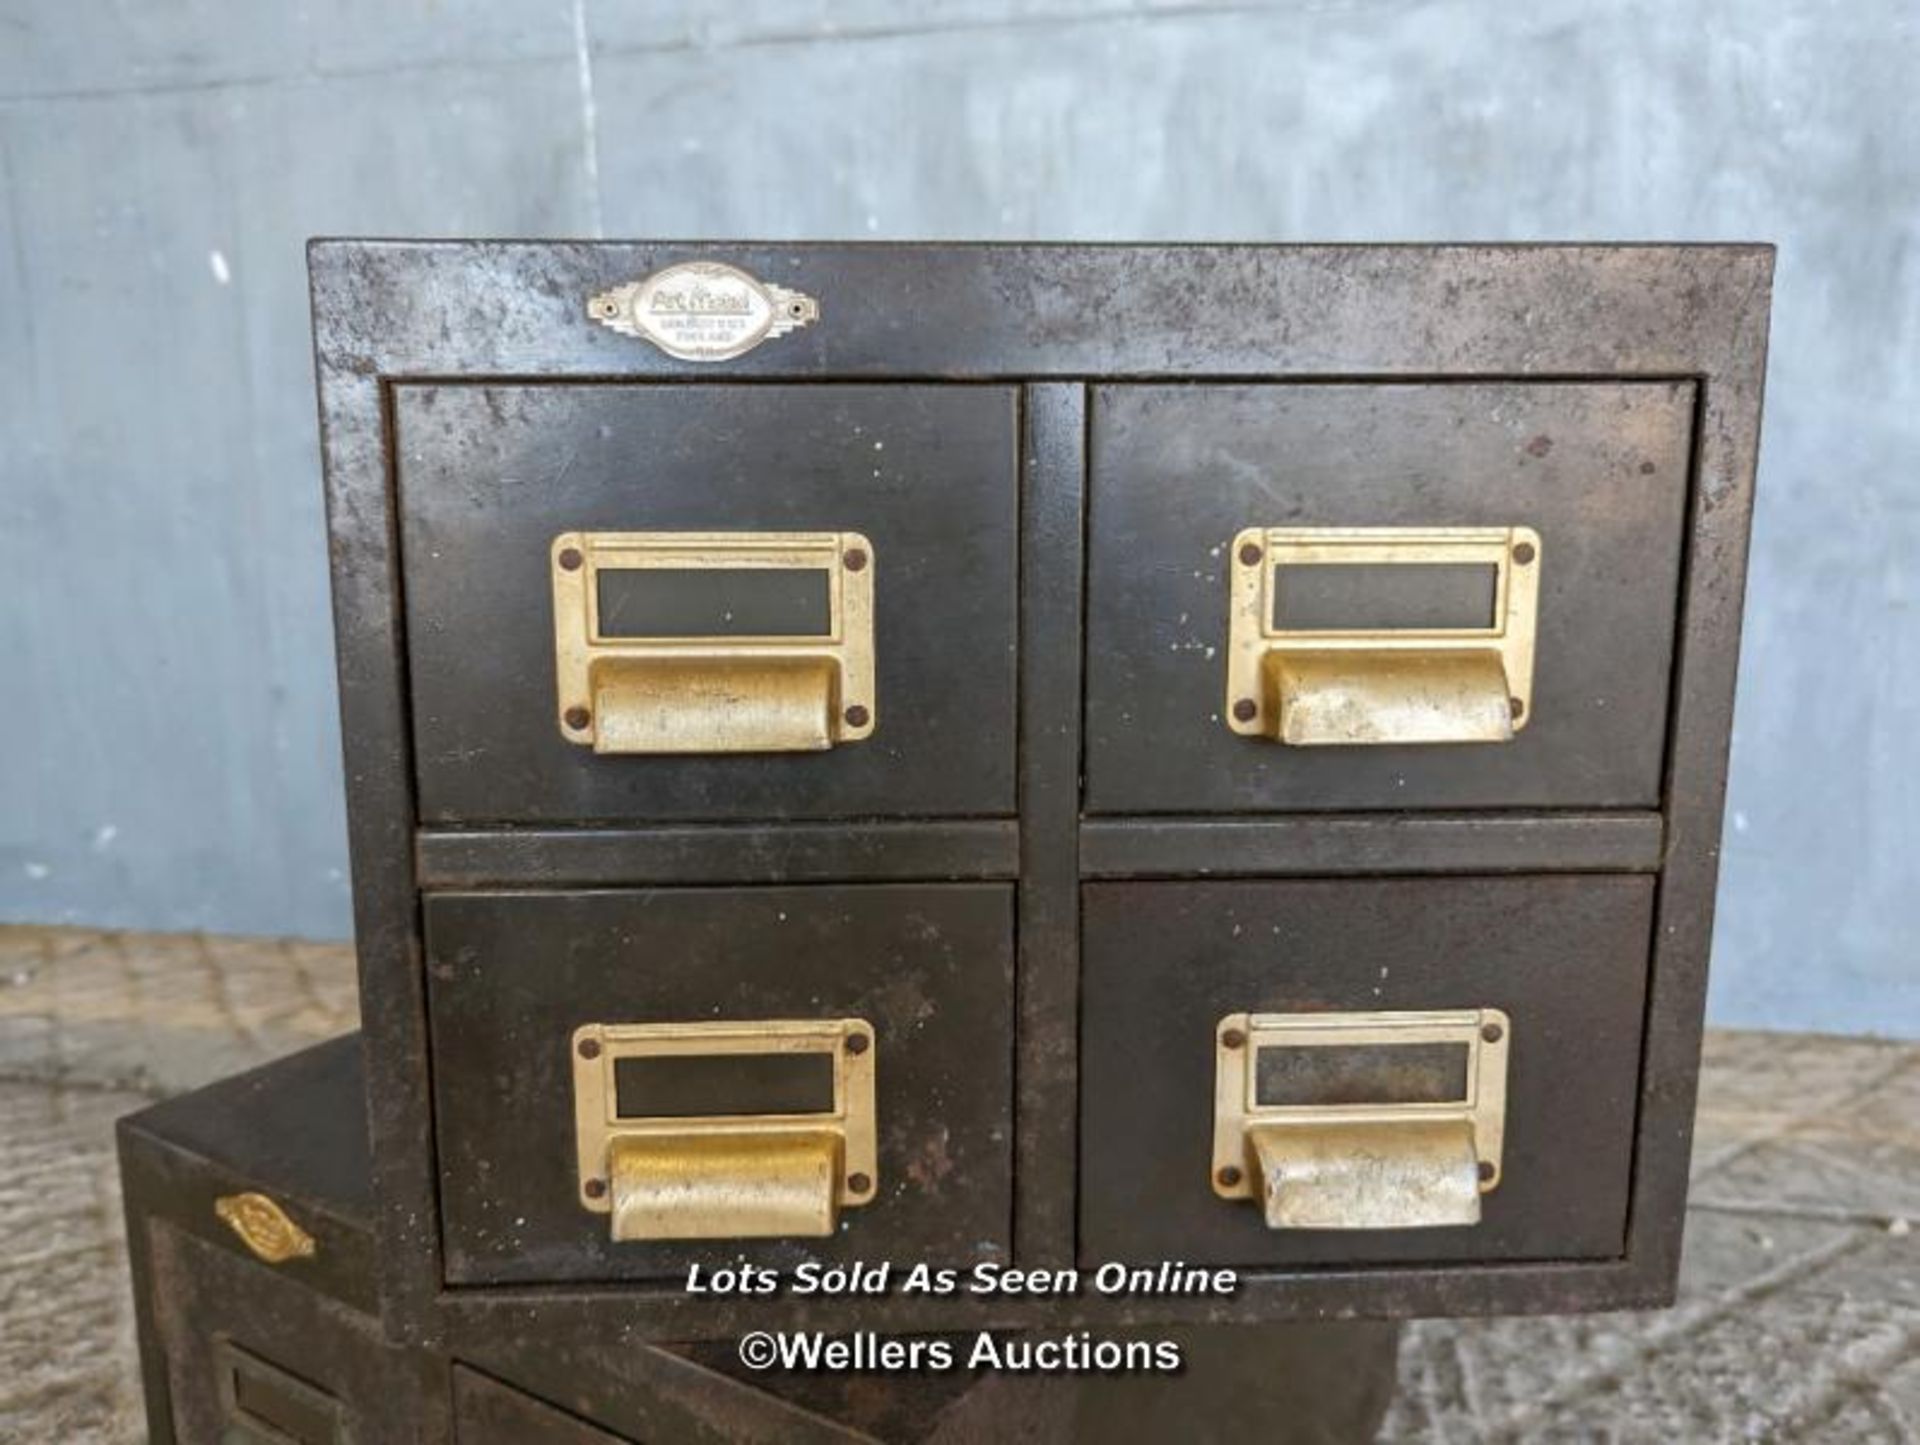 2 metal four drawer filing cabinets C1930 with brass handles/card holders. Some rust and paint loss